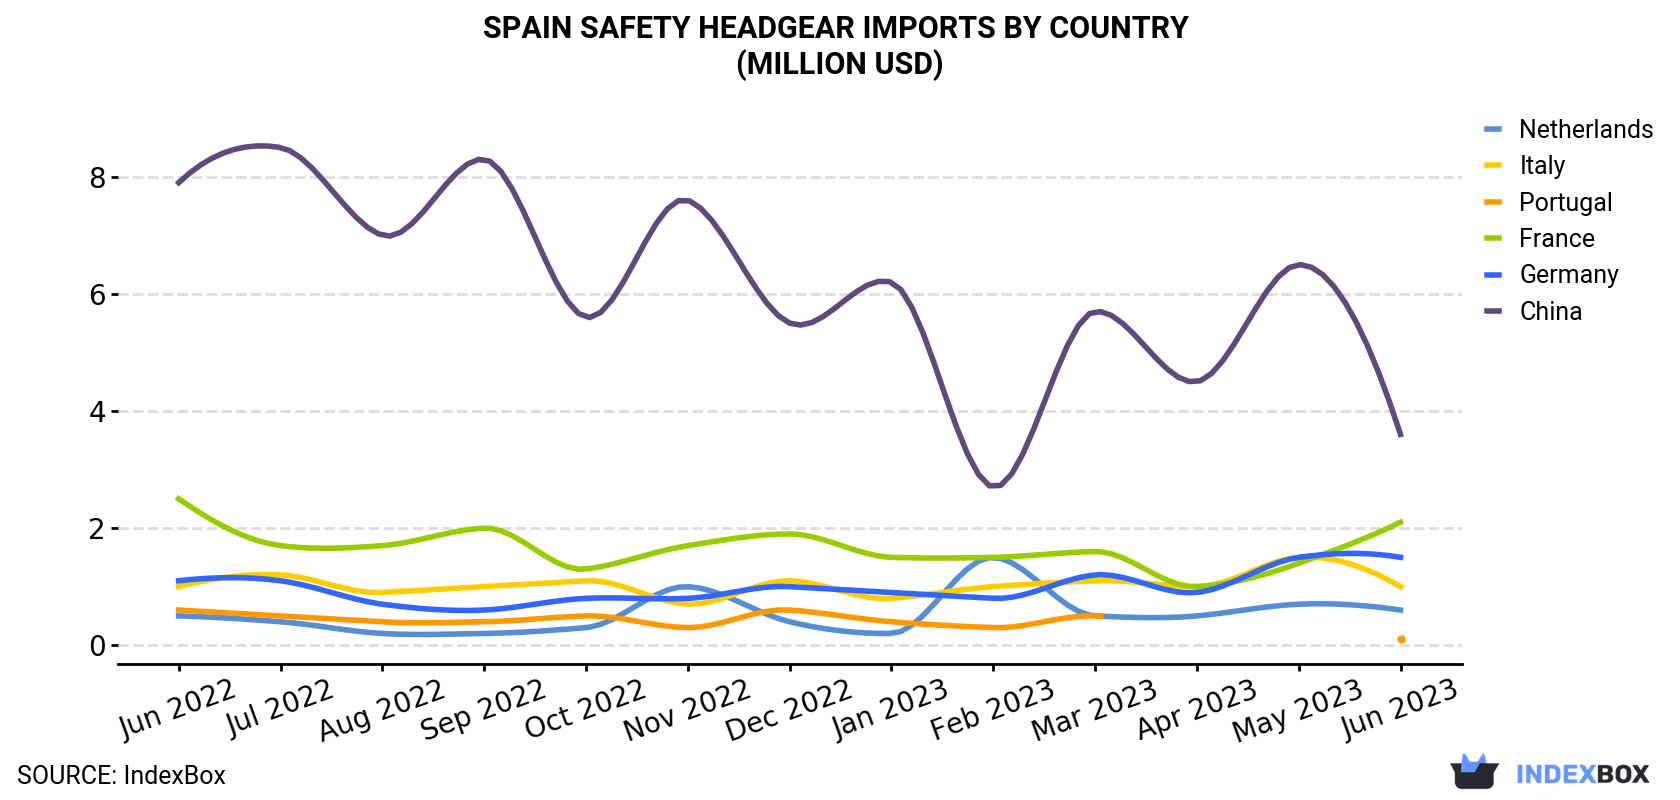 Spain Safety Headgear Imports By Country (Million USD)